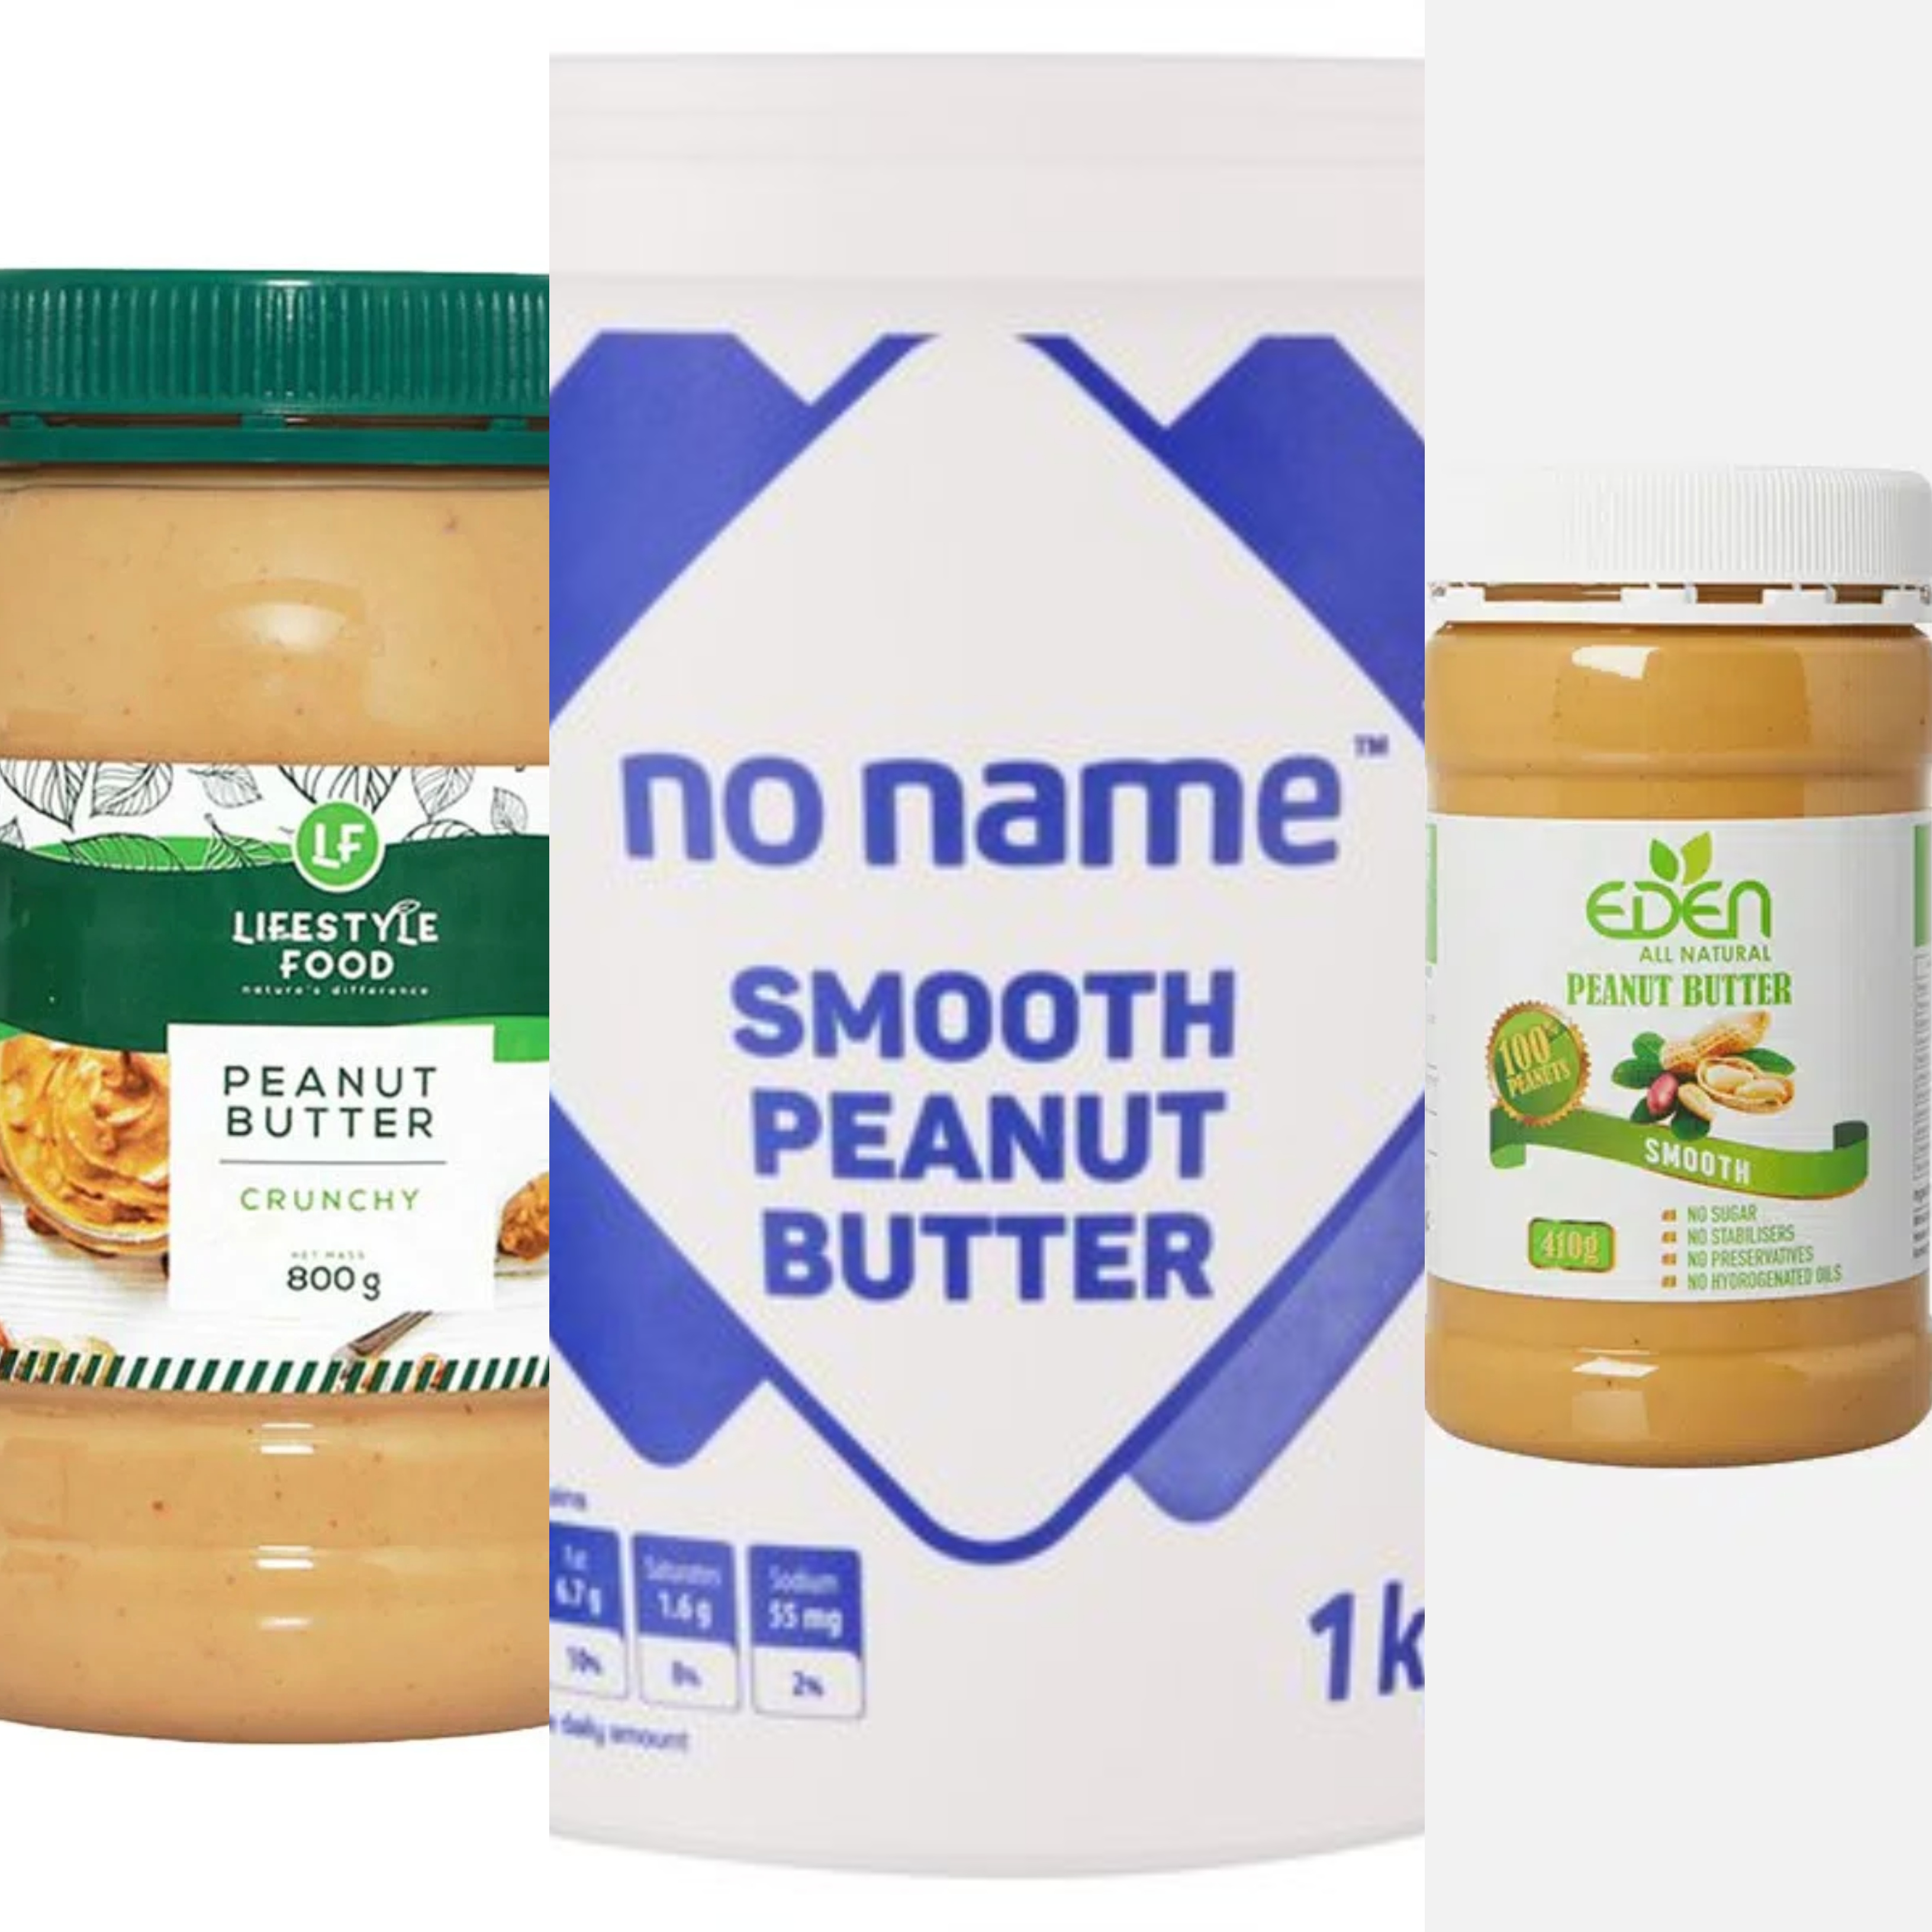 Peanut butter brands recalled for being unsafe for human consumption